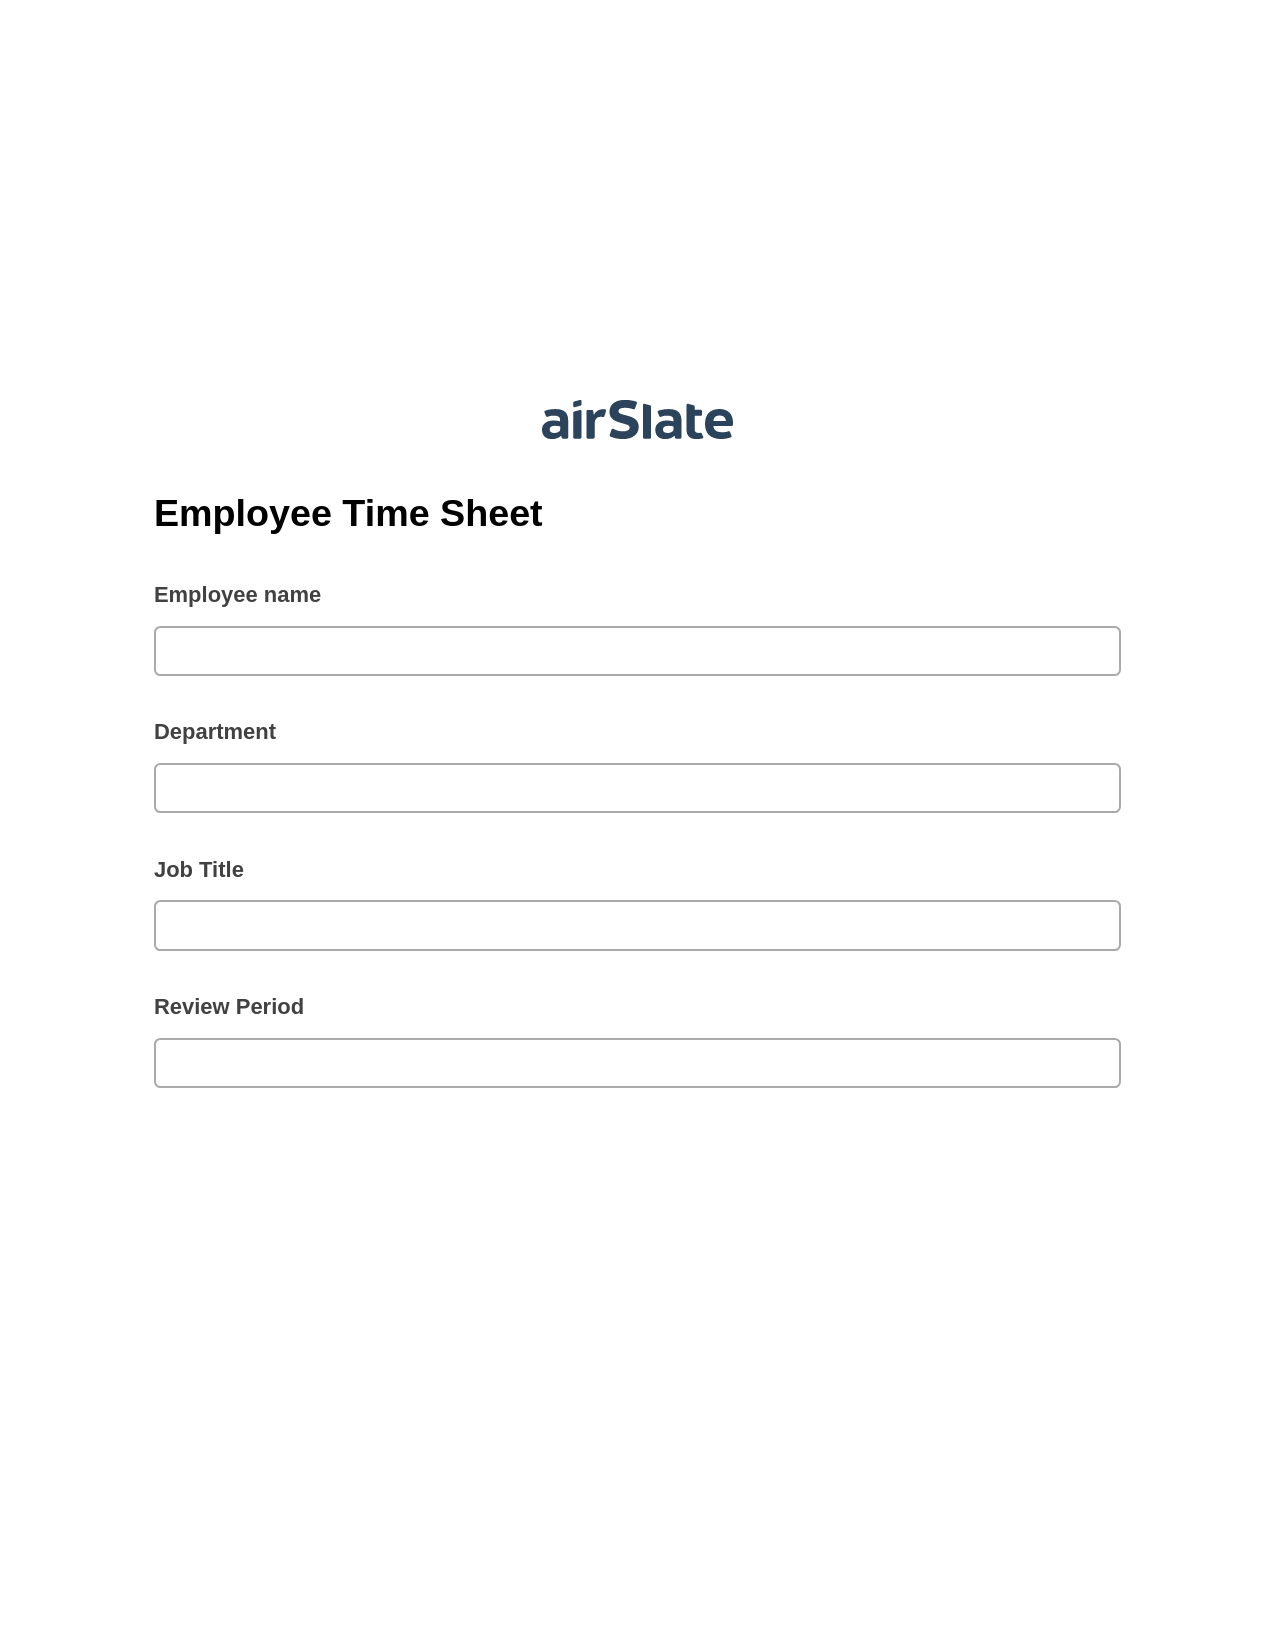 Multirole Employee Time Sheet Pre-fill from Salesforce Records Bot, Create Salesforce Records Bot, Export to Google Sheet Bot